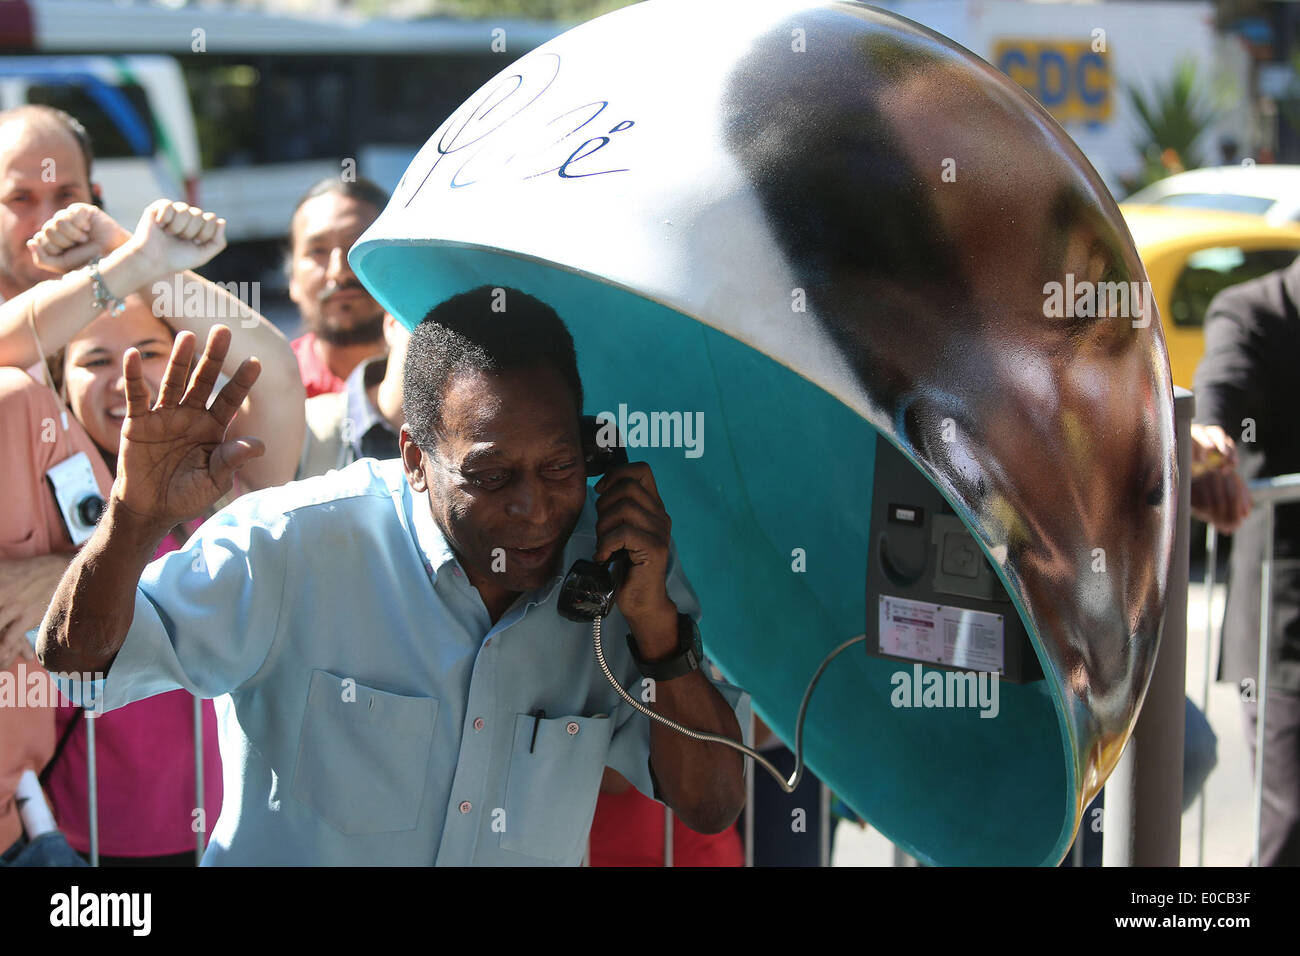 Sao Paulo, Sao Paulo will host the opening match of the FIFA World Cup between Brazil and Croatia. 12th June, 2014. The former Brazilian soccer player Edson Arantes do Nascimento also known as Pele poses during the 'Call Parade' in Sao Paulo, Brazil, on May 8, 2014. The parade is held as part of the preparations for the FIFA World Cup with all the phone booths decorated with the national soccer team colors and the image of Pele, as a homage. Sao Paulo will host the opening match of the FIFA World Cup between Brazil and Croatia, on June 12, 2014. Credit:  Rahel Patrasso/Xinhua/Alamy Live News Stock Photo